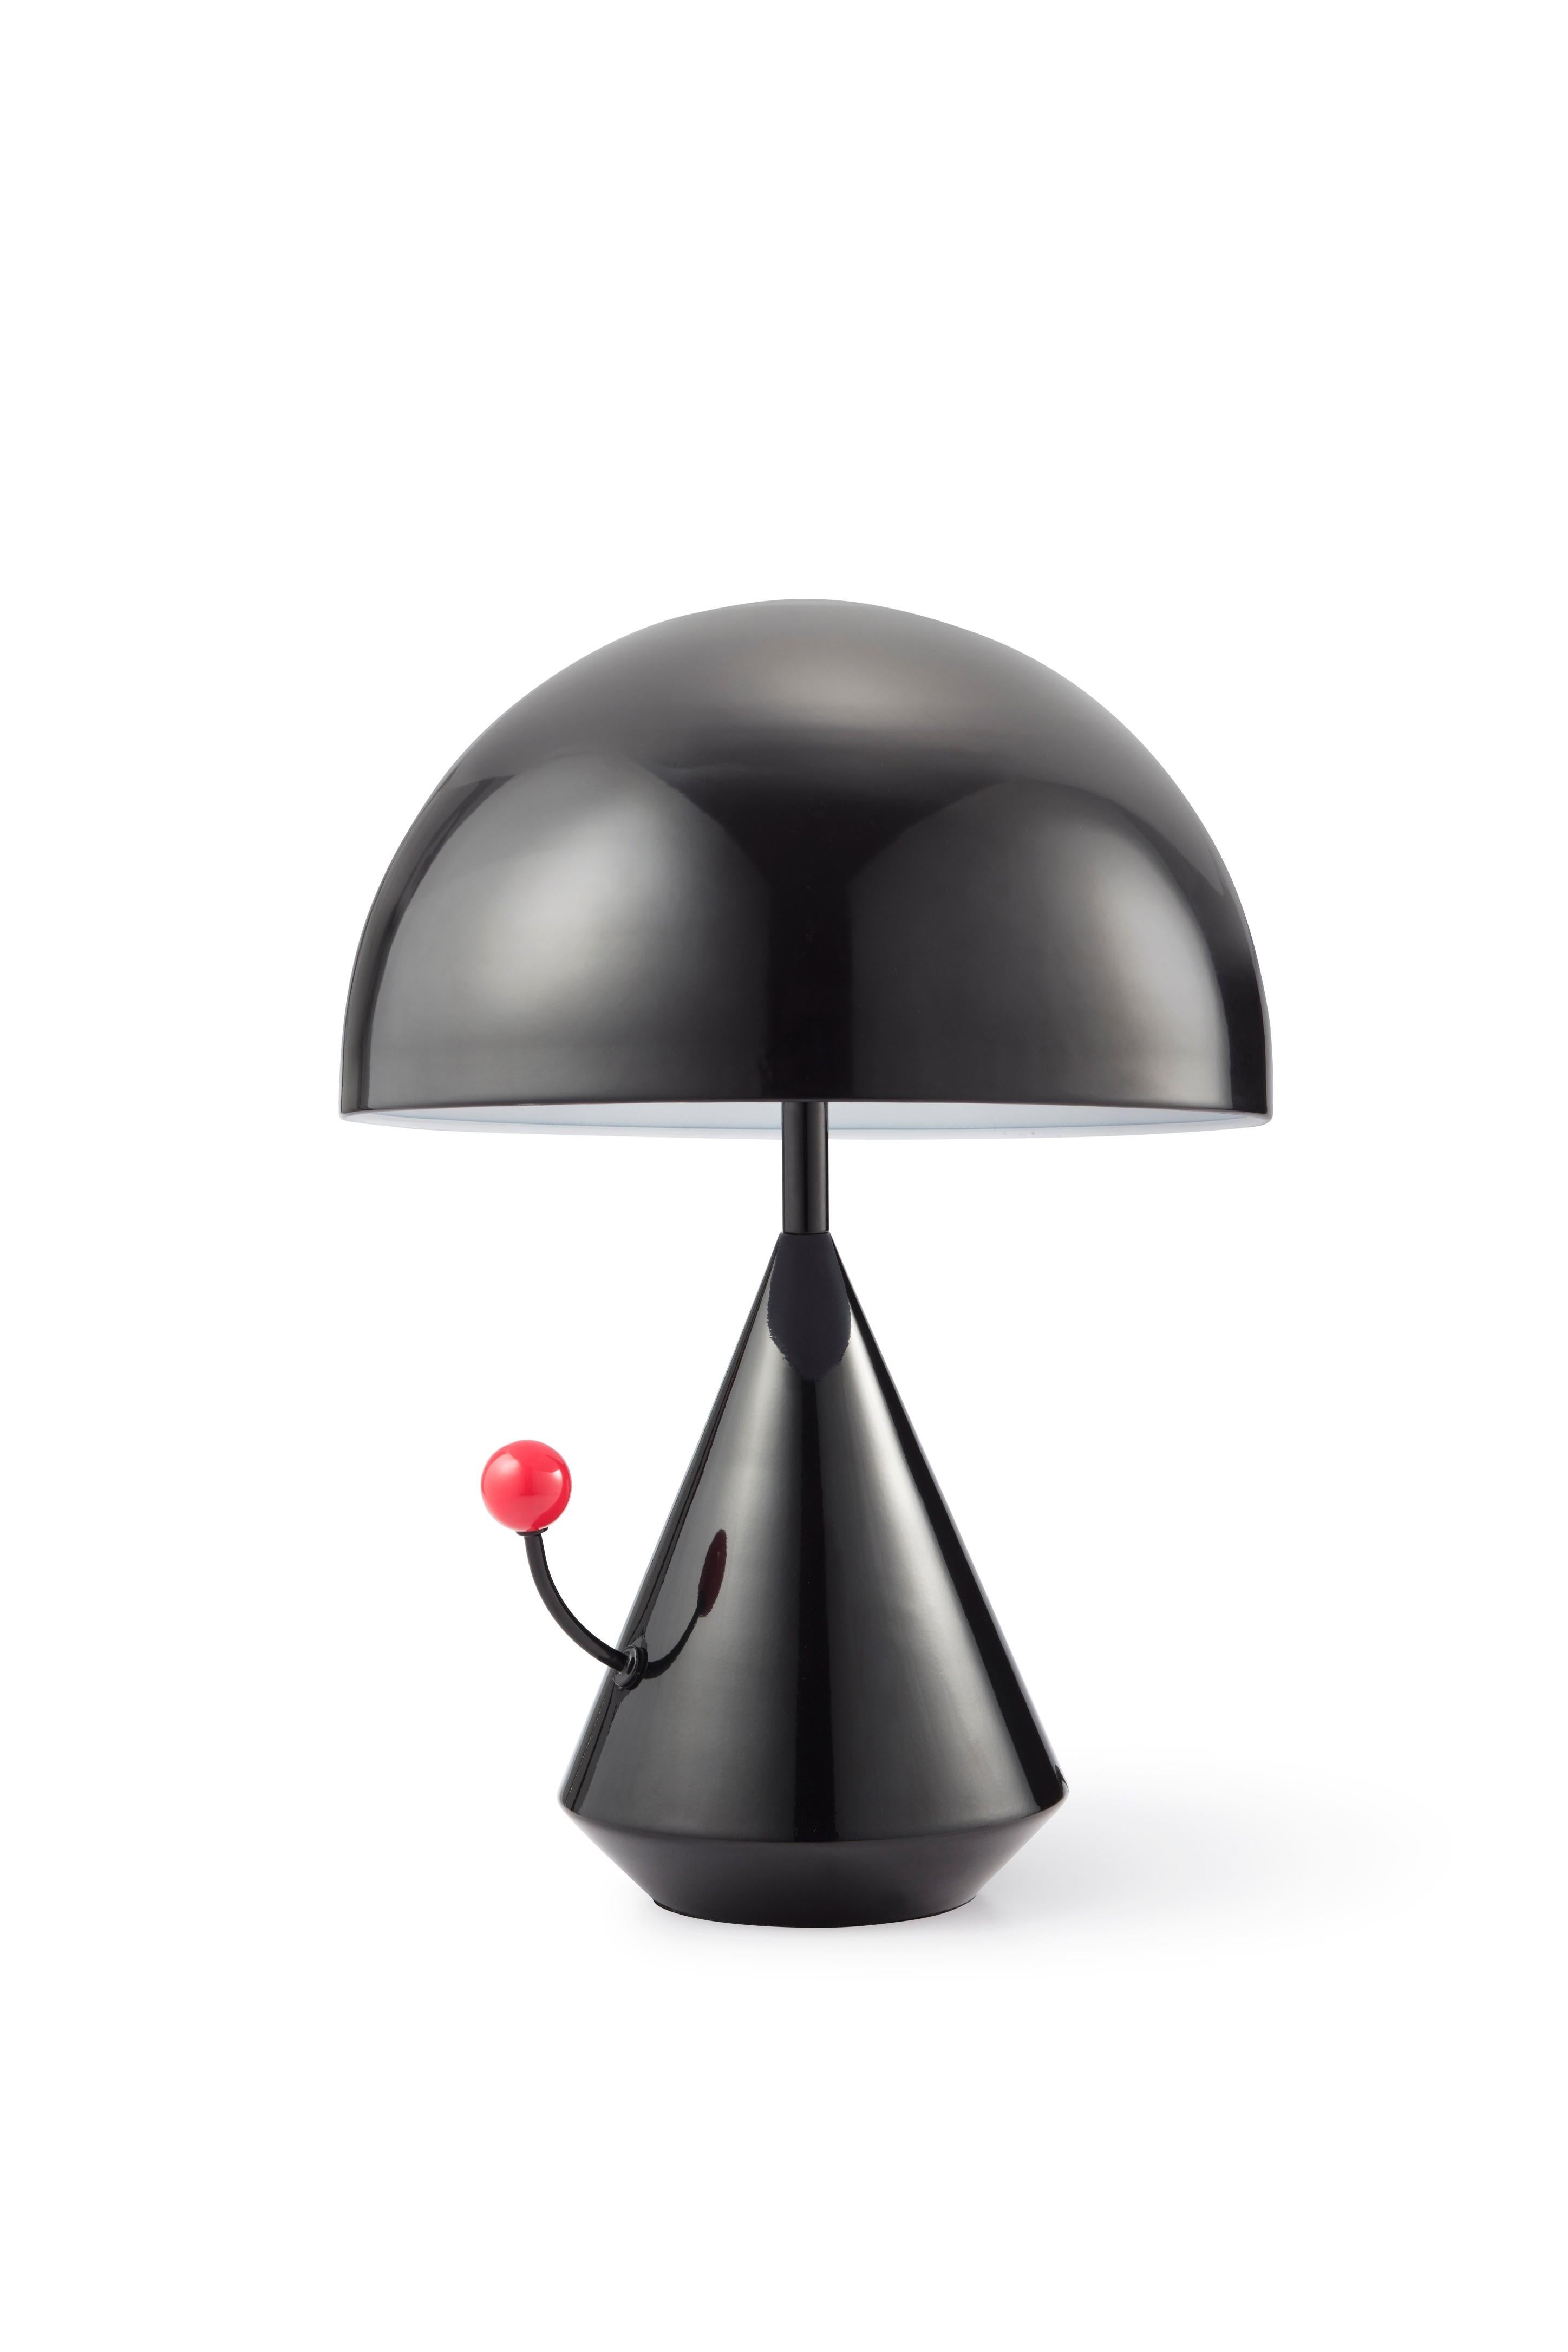 Dali surrealistic table lamp by Thomas Dariel, Maison Dada
Measures: Diameter 31.5 x height 43 cm
Tricolored
Powder coated metal shade, base and framework
Touch switch in color finish
220V – 240V 50Hz E27 max. 60W
Available in 3 color